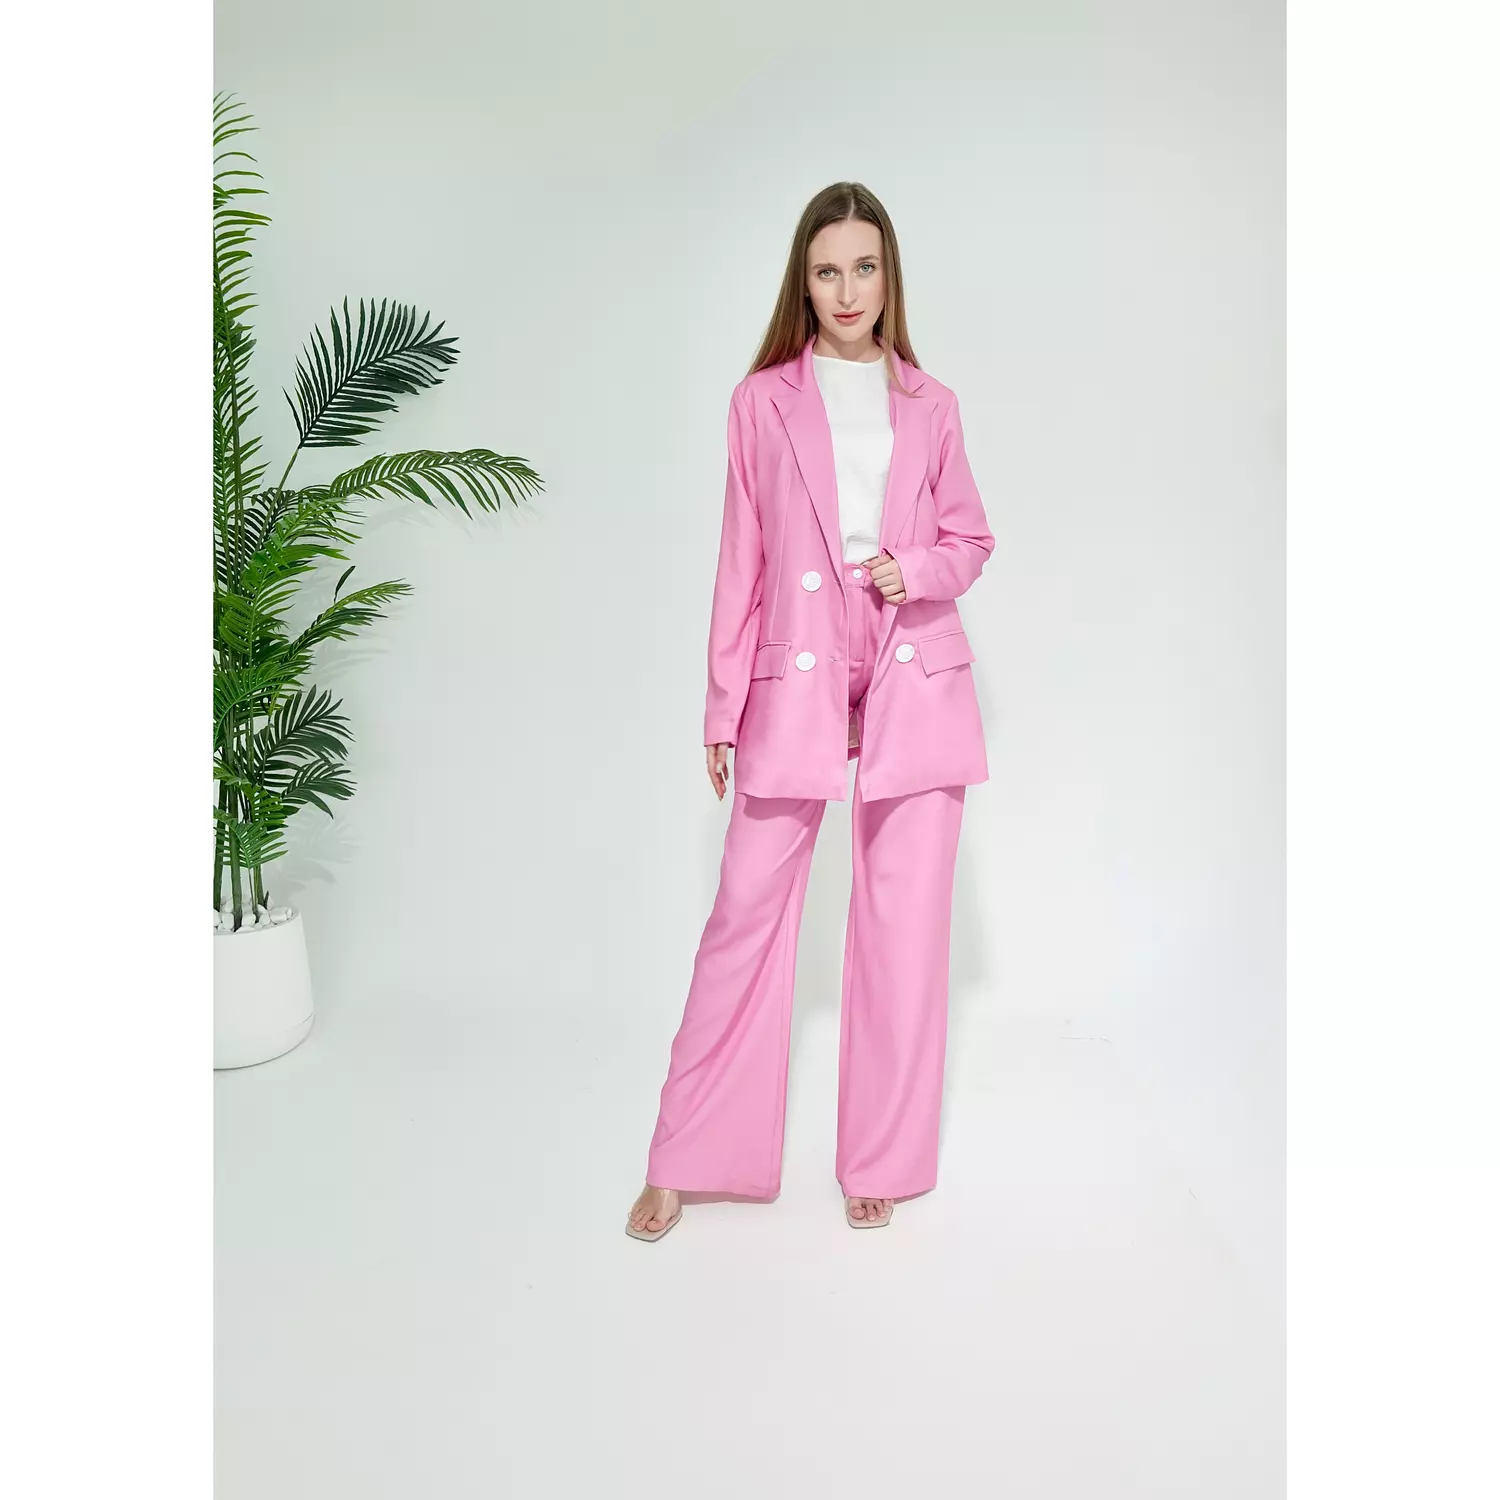 PINK SUIT hover image